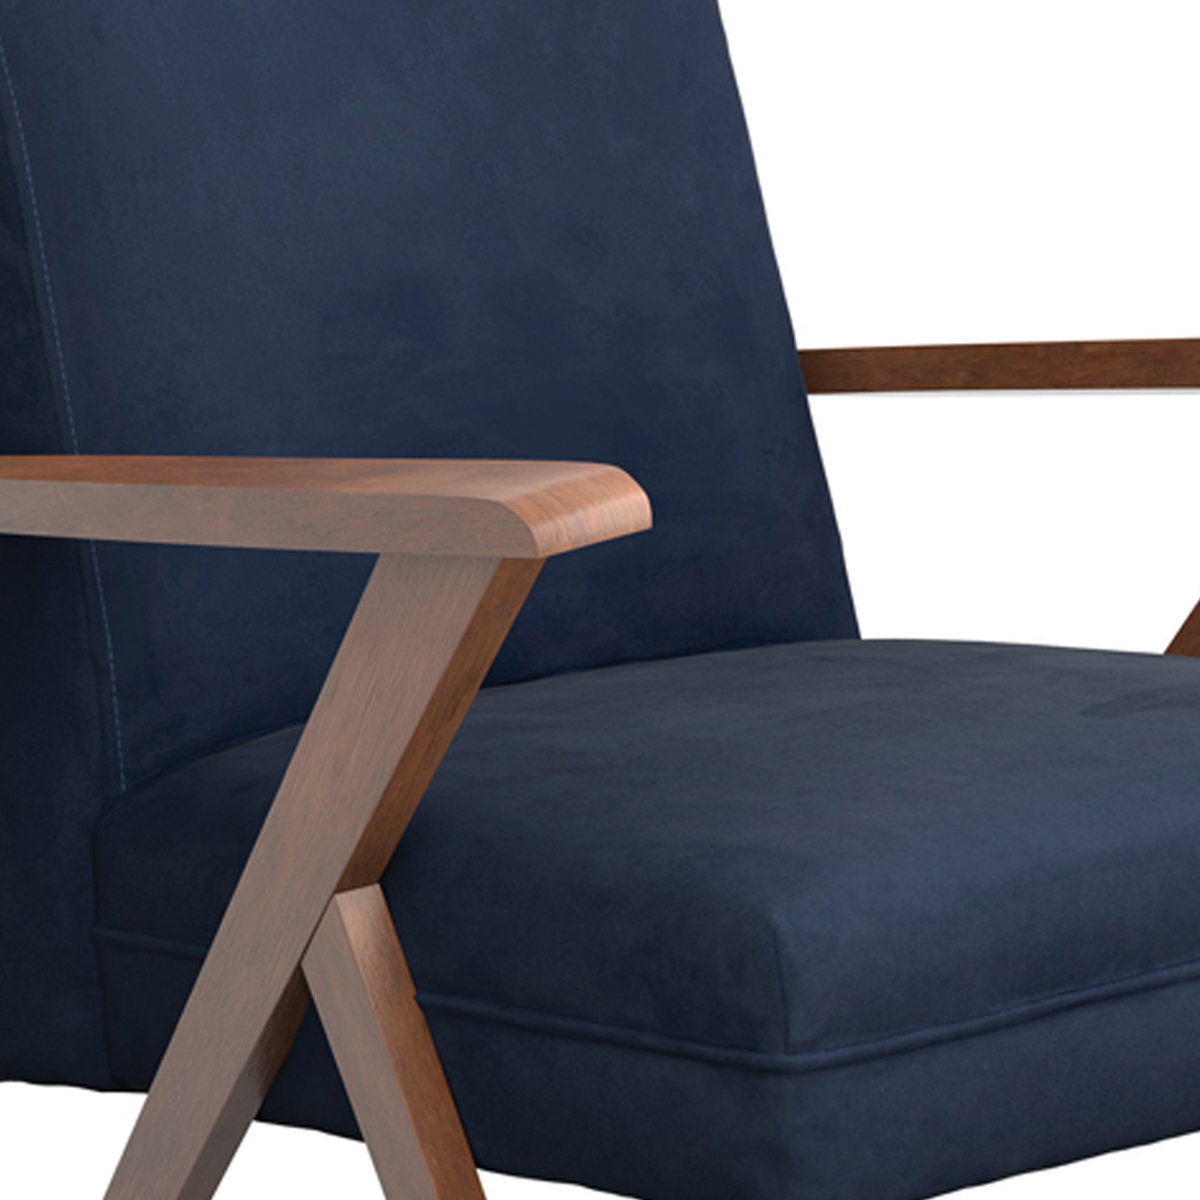 Contemporary Dual Tone Wooden Armchair With Padded Seat, Blue And Brown- Saltoro Sherpi